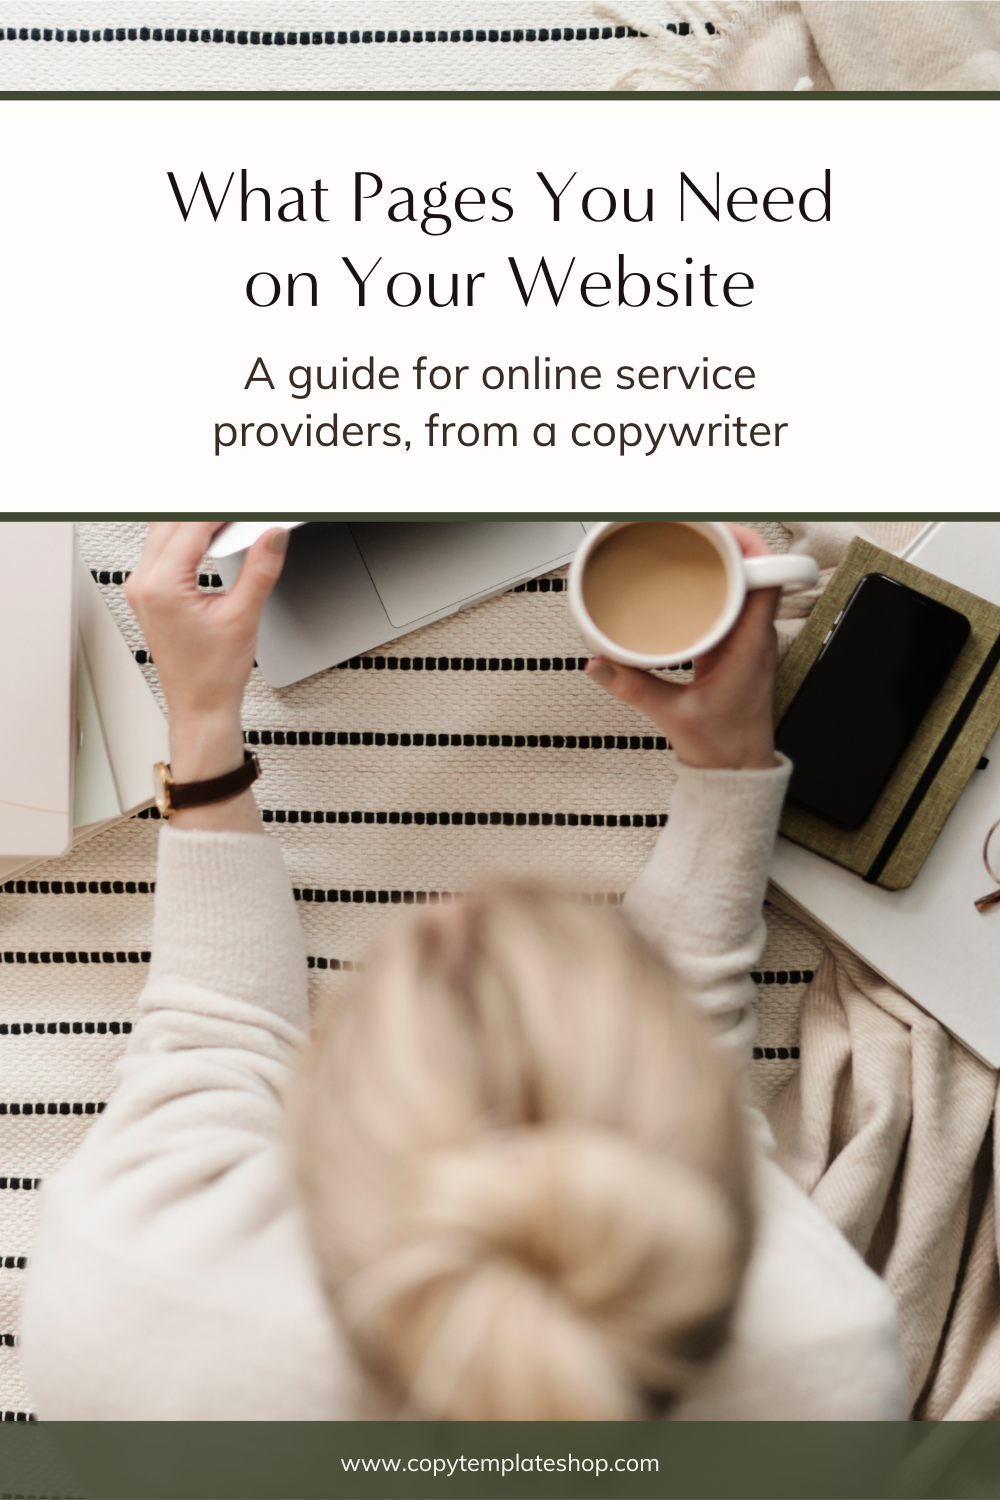 Must-Have Website Pages for Service Providers